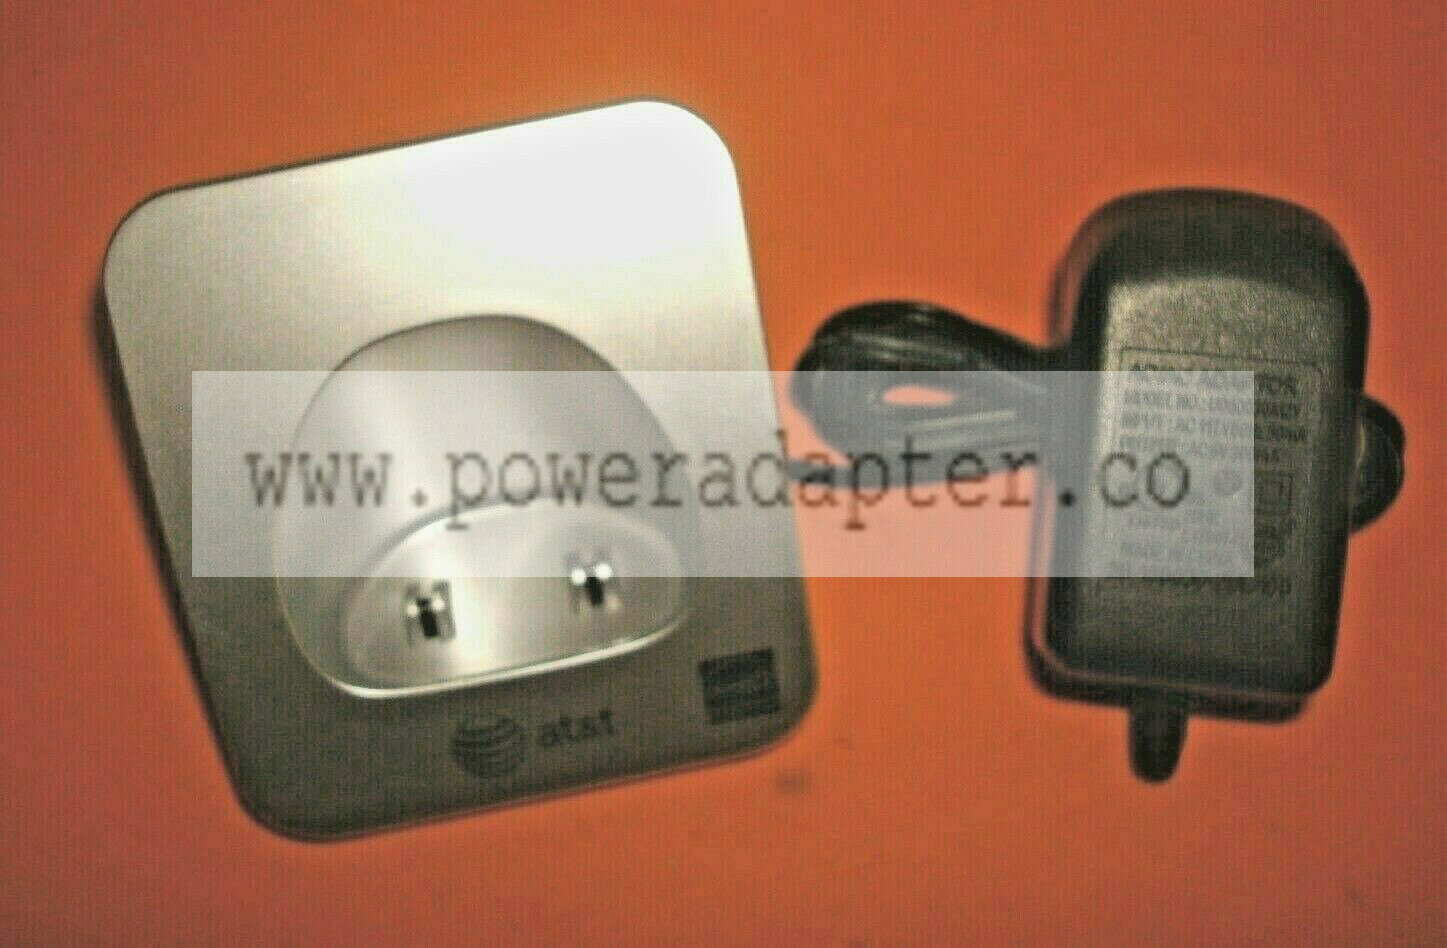 AT&T CHARGING CRADLE w/ADAPTER FOR HS CRL81112 CRL81212 CRL82112 CRL82212 K3.3 Model: CRL81112 CRL81212 CRL82112 CR